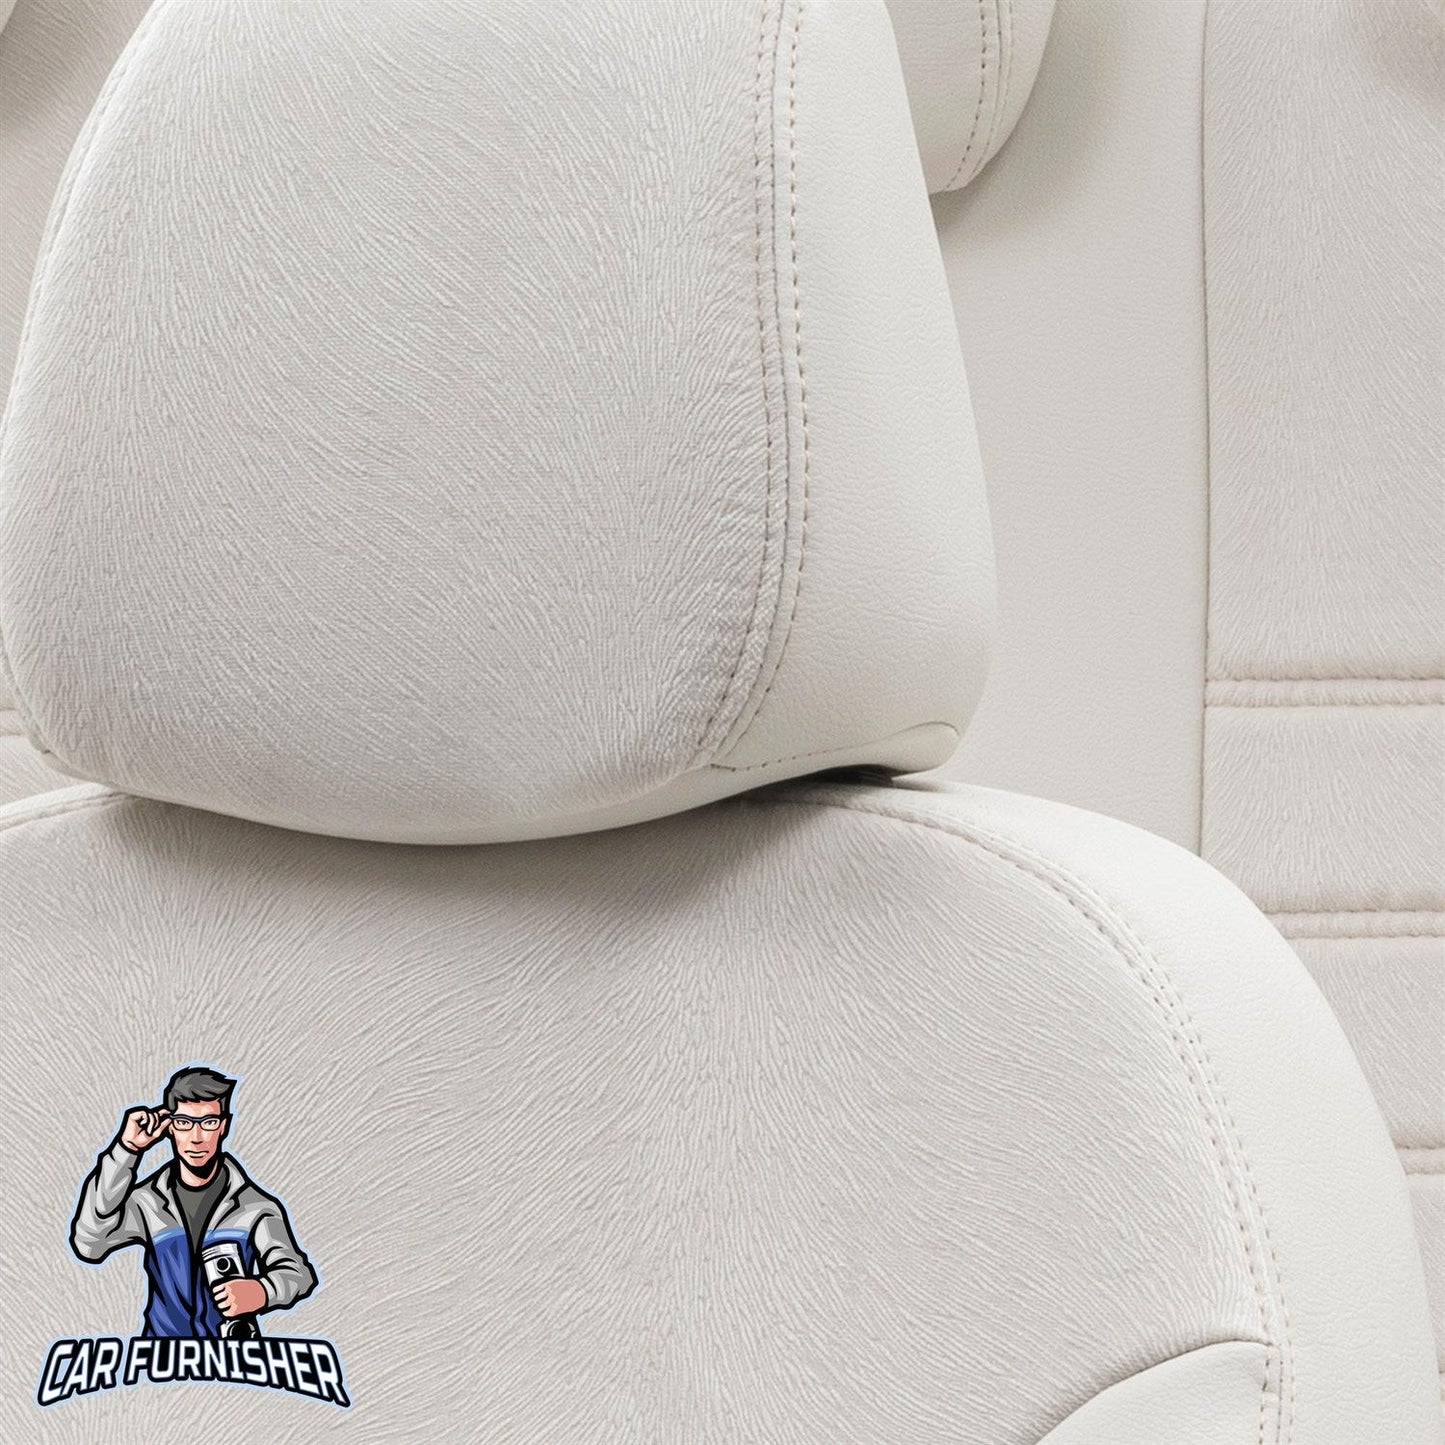 Mercedes C Class Seat Covers London Foal Feather Design Ivory Leather & Foal Feather